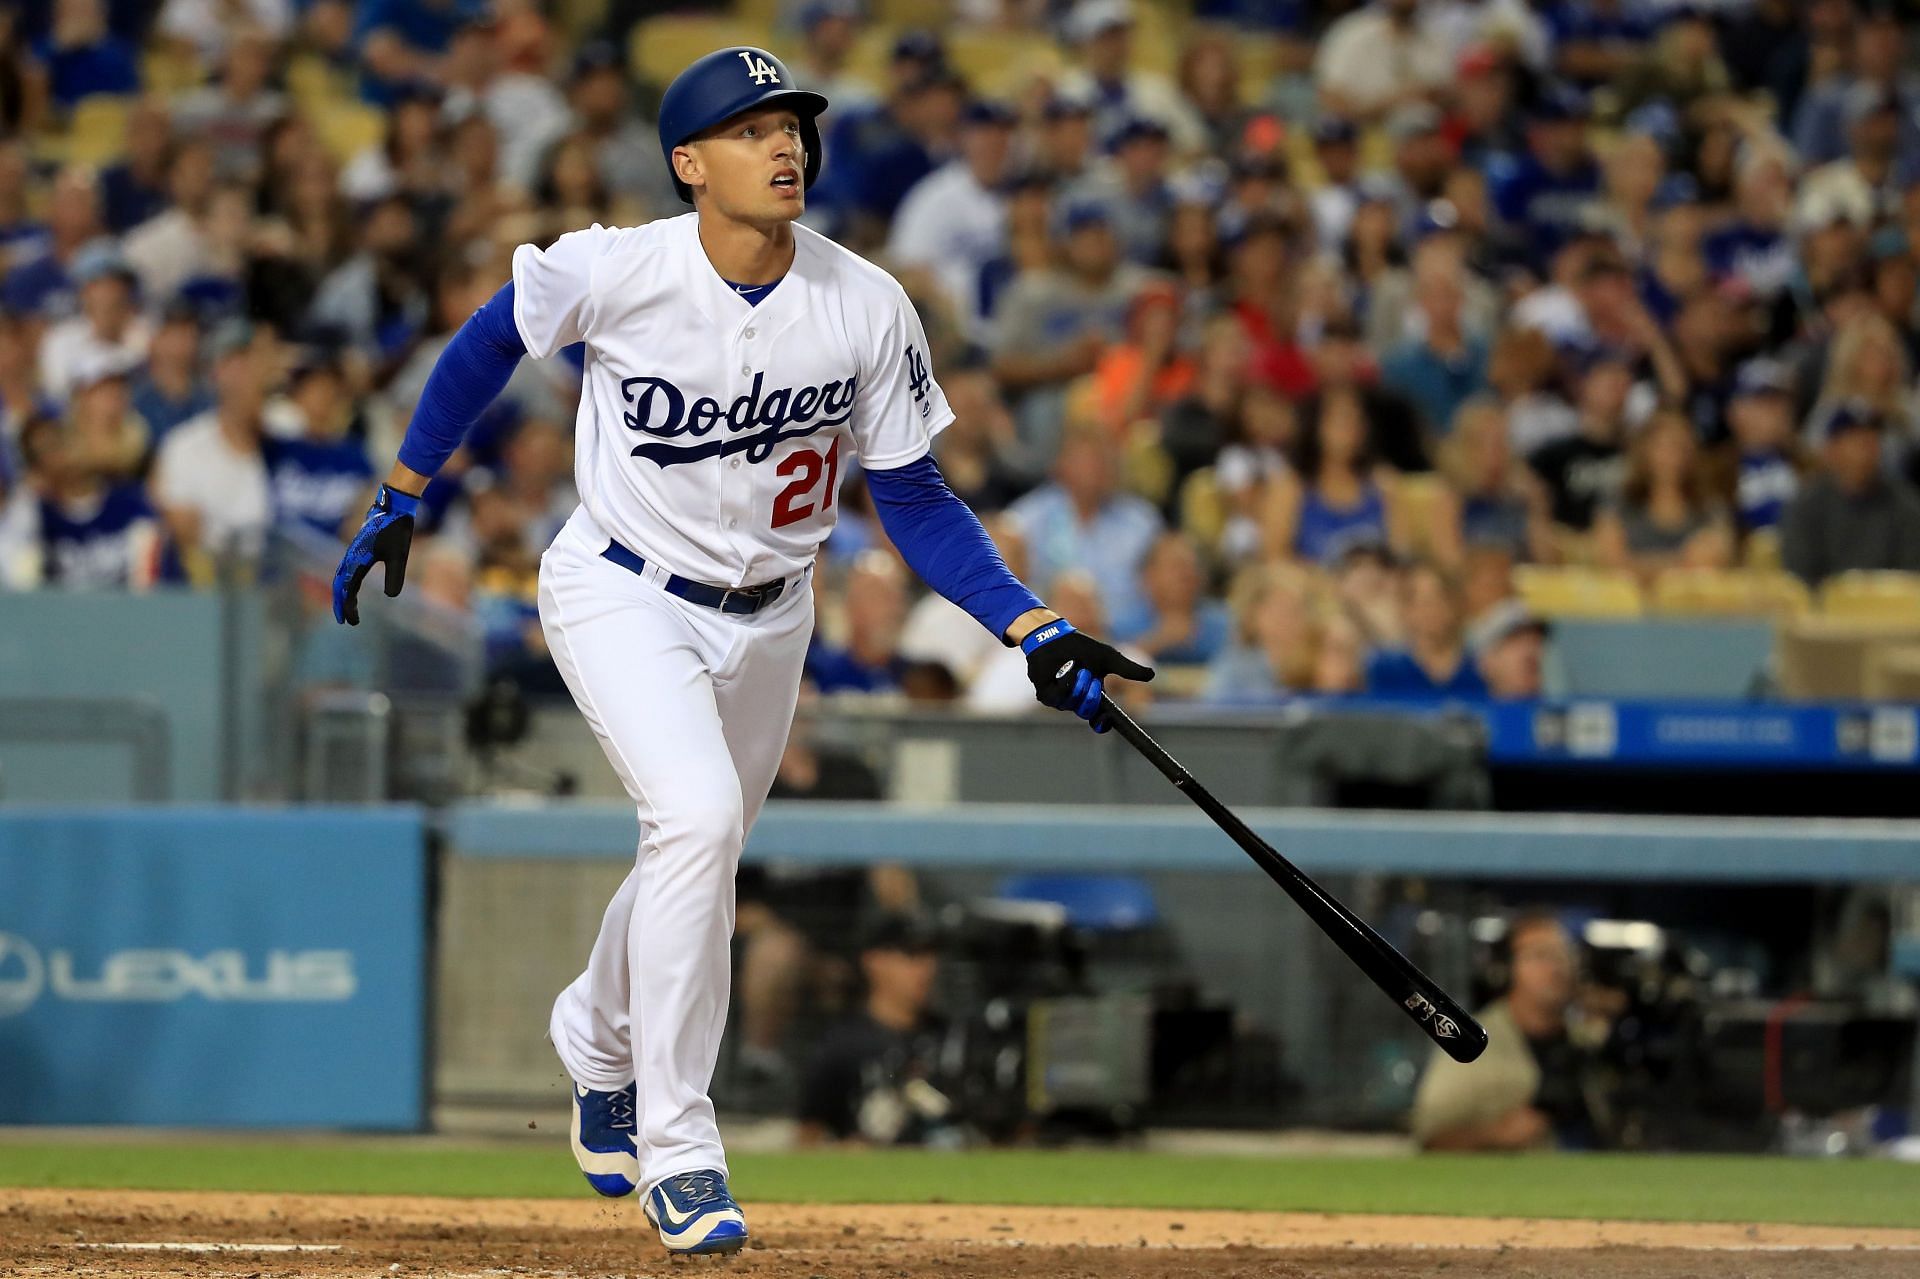 Trayce Thompson joins brother Klay in Oakland after A's claim him